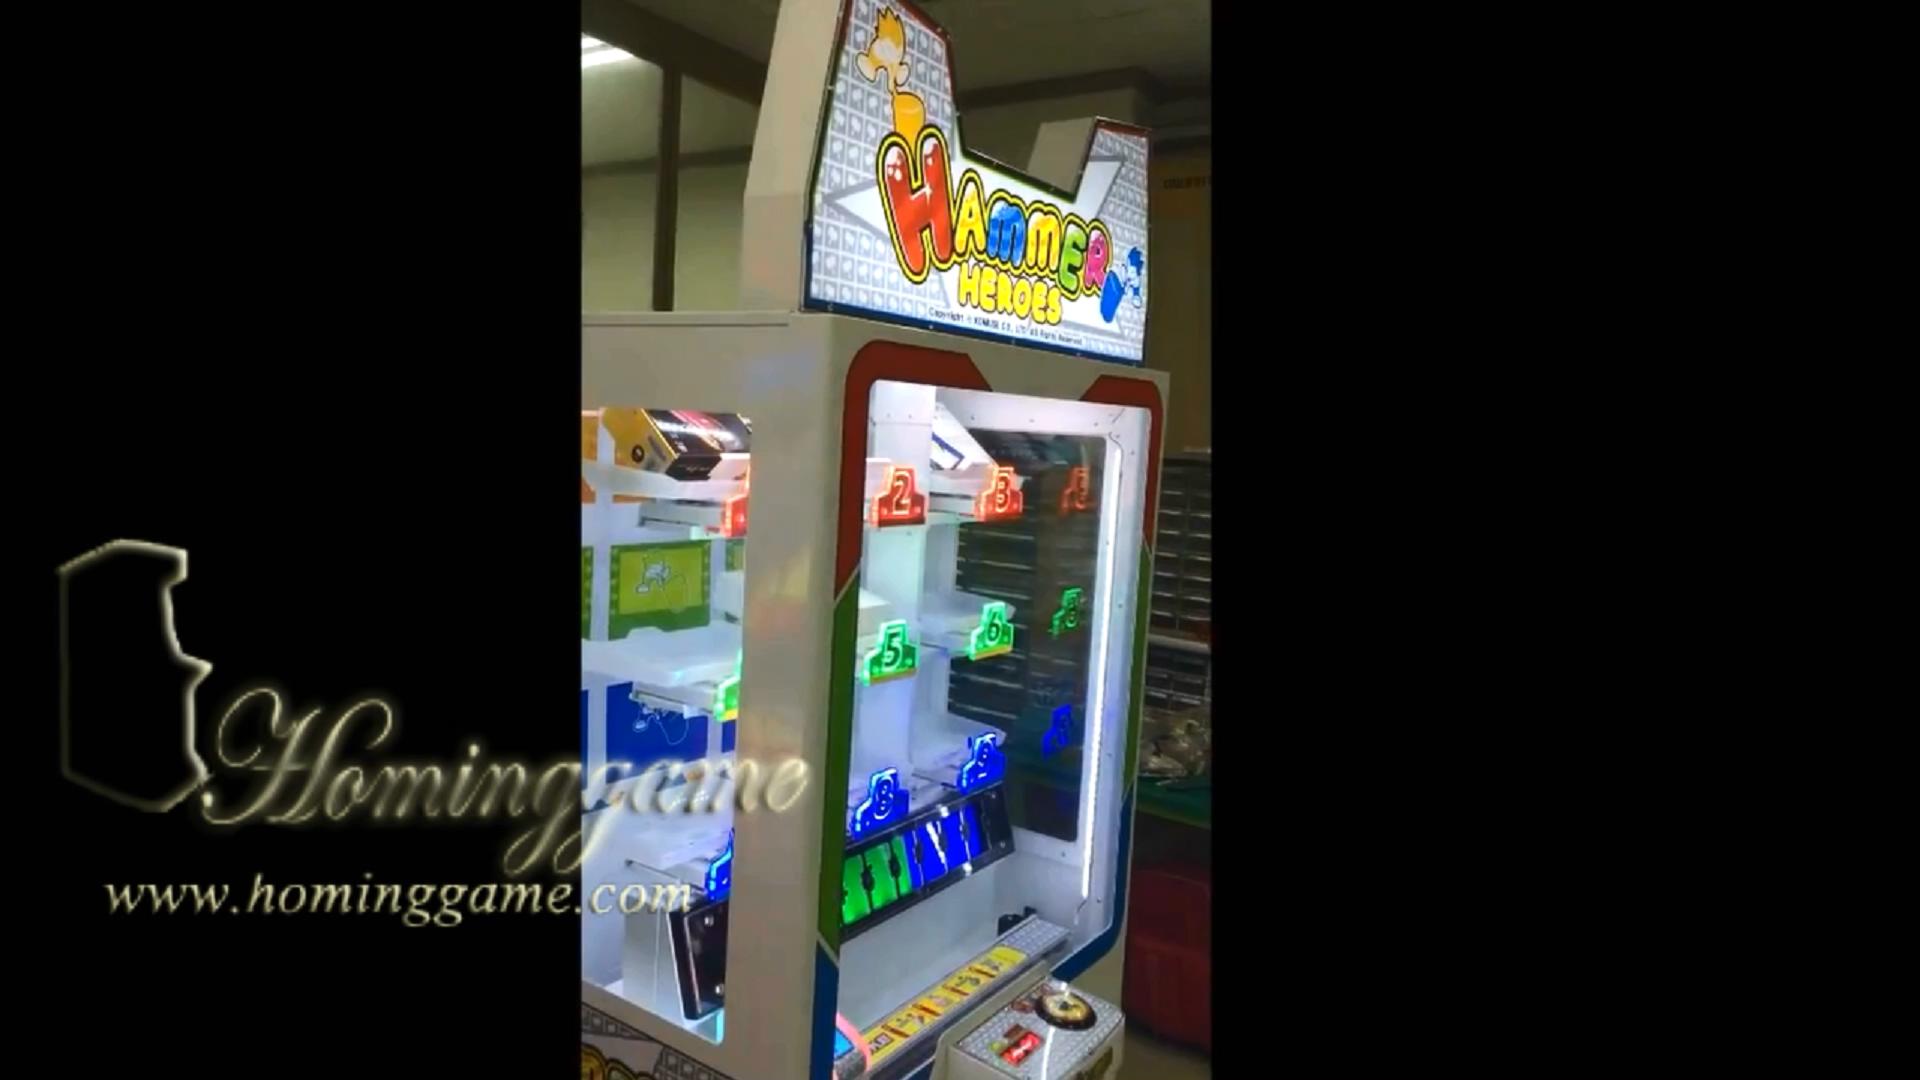 hammer heroes prize game machine,hammer heroes prize redemption game machine,prize redemption game mahcine,game machine,crane machine,hammer heroes game,hammer heroes,hammer prize game machine,coin operated game machine,arcade game machine,amusement park game equipment,shopping mall prize game machine,shopping mall prize vending machine,prize redemption game machine,redemption game machine,claw game mahcine,claw prize game machine,electrical game machine,key master prize game machine,key master prize redemption game machine,barber cut prize game machine,winner cuber prize game machine,icube prize game machine,screw driver prize game machine,crazy drill master prize game machine,drill master prize game machine,cut string prize game machine,key point push prize game machine,key push prize game machine,hominggame prize game machine,hominggame game machine,entertainment game machine,game equipment,entertainment,gametube.hk,www.gametube.hk,axe master prize game machine,axe master,lucky star prize game machine,luck star game machine,lucky star